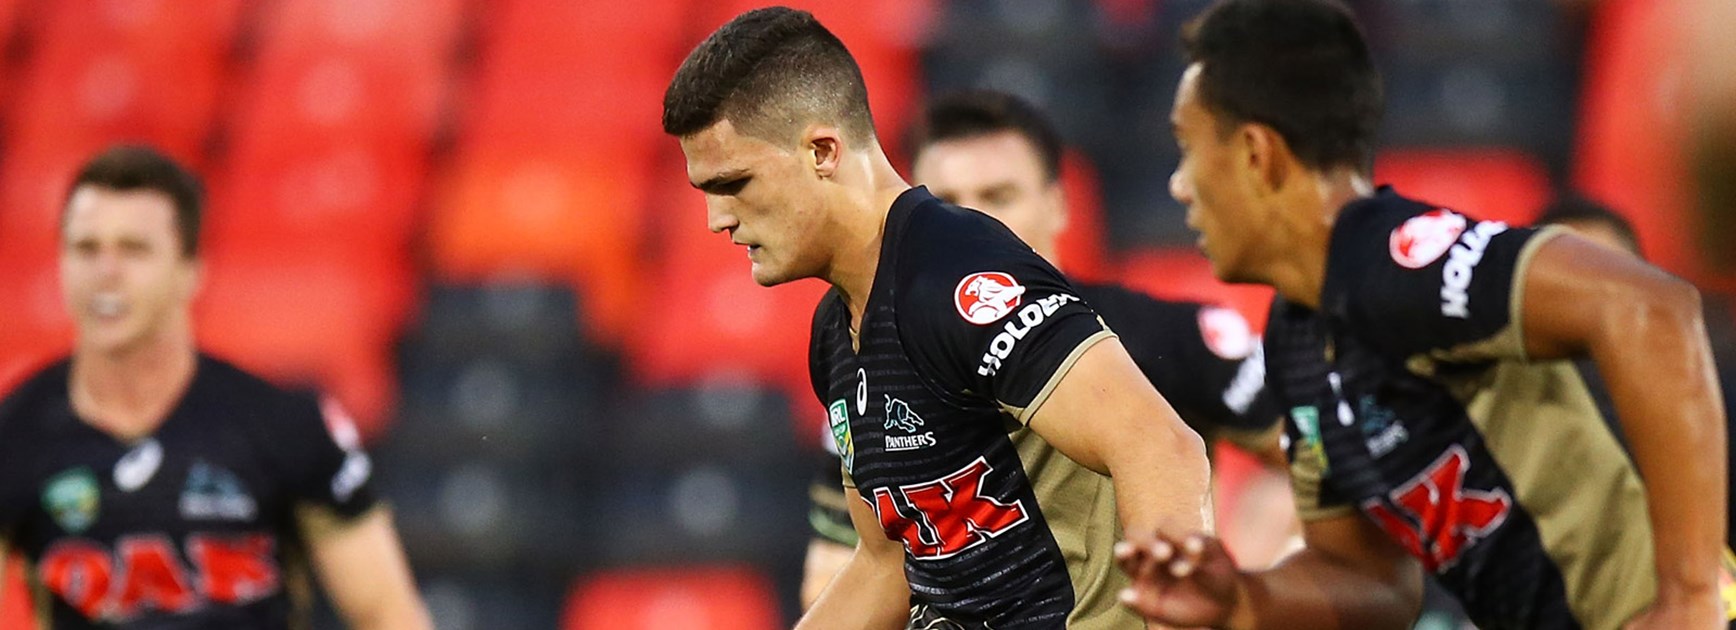 The Penrith NYC side enjoyed a good victory over the Cowboys in Round 6.